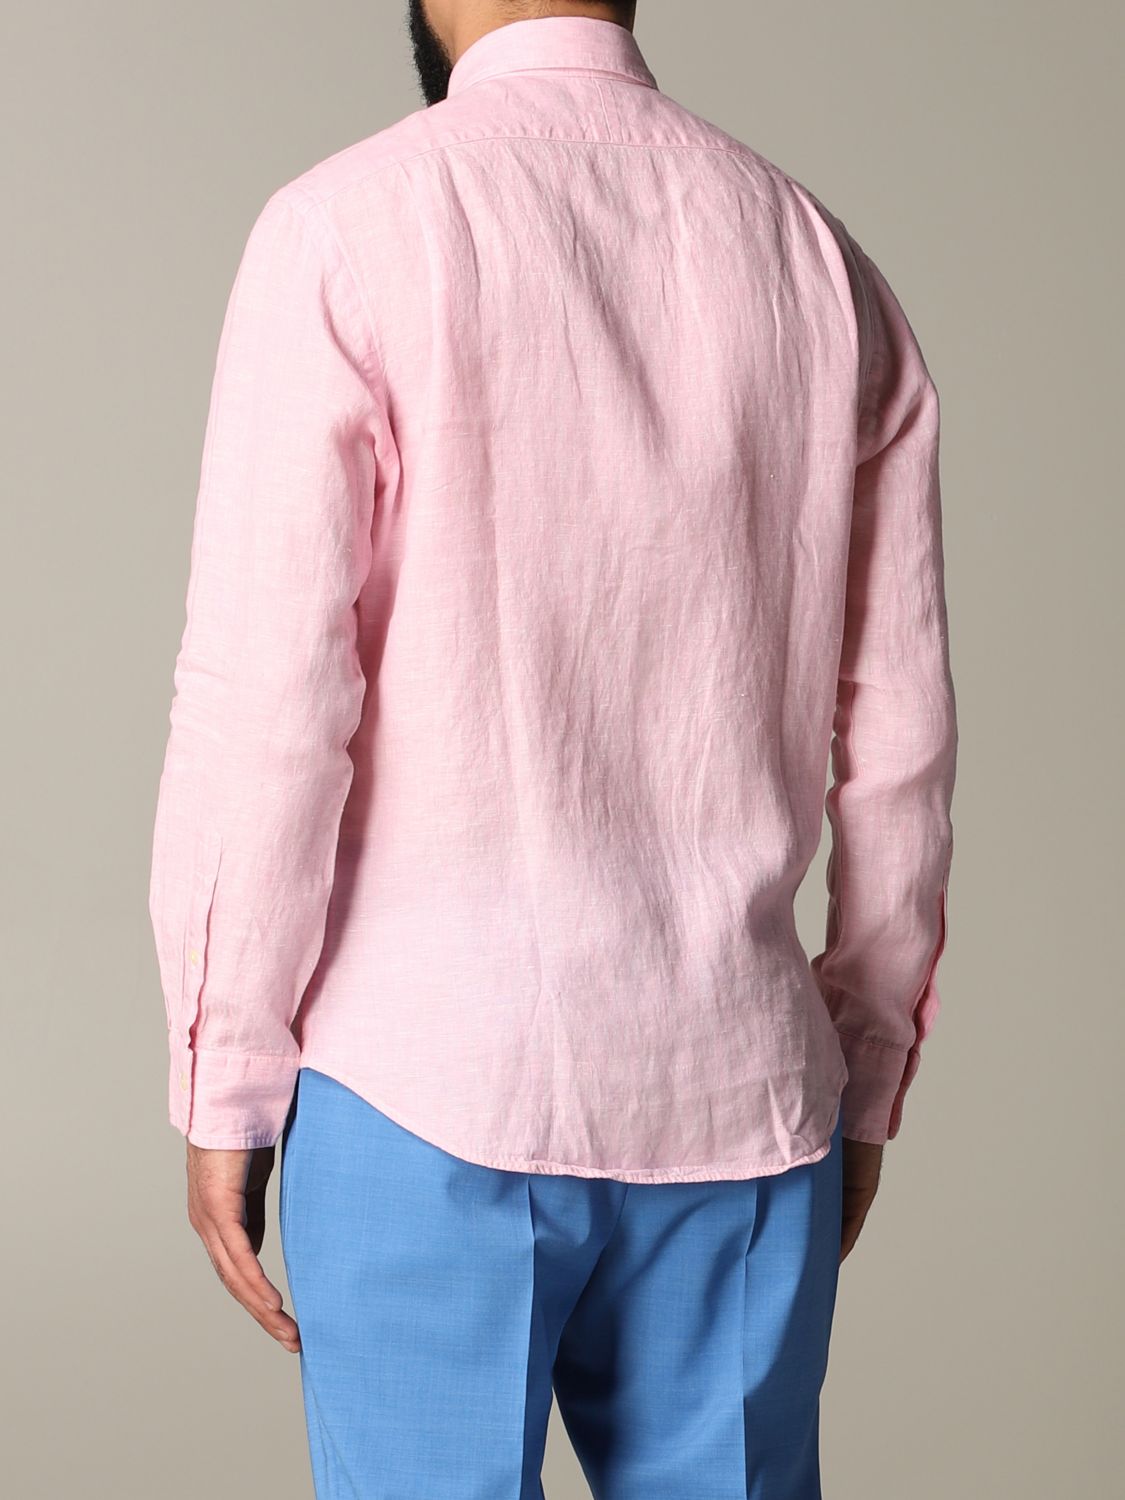 Shirt Polo Ralph Lauren: Polo Ralph Lauren shirt for man pink 3